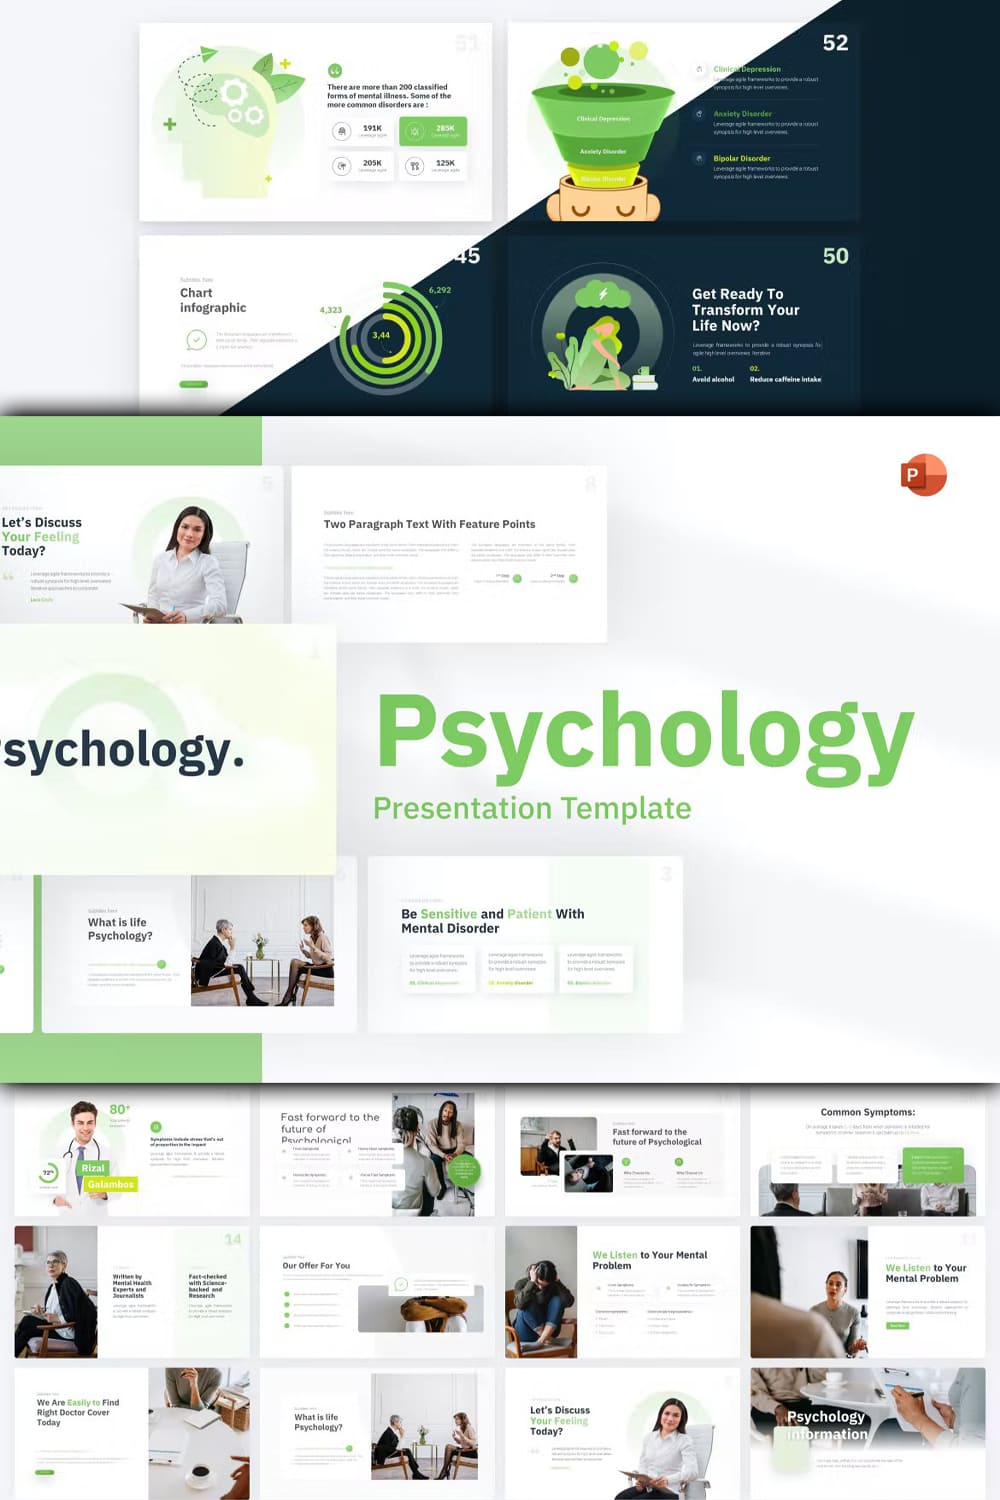 Psychology healthcare powerpoint template - pinterest image preview.